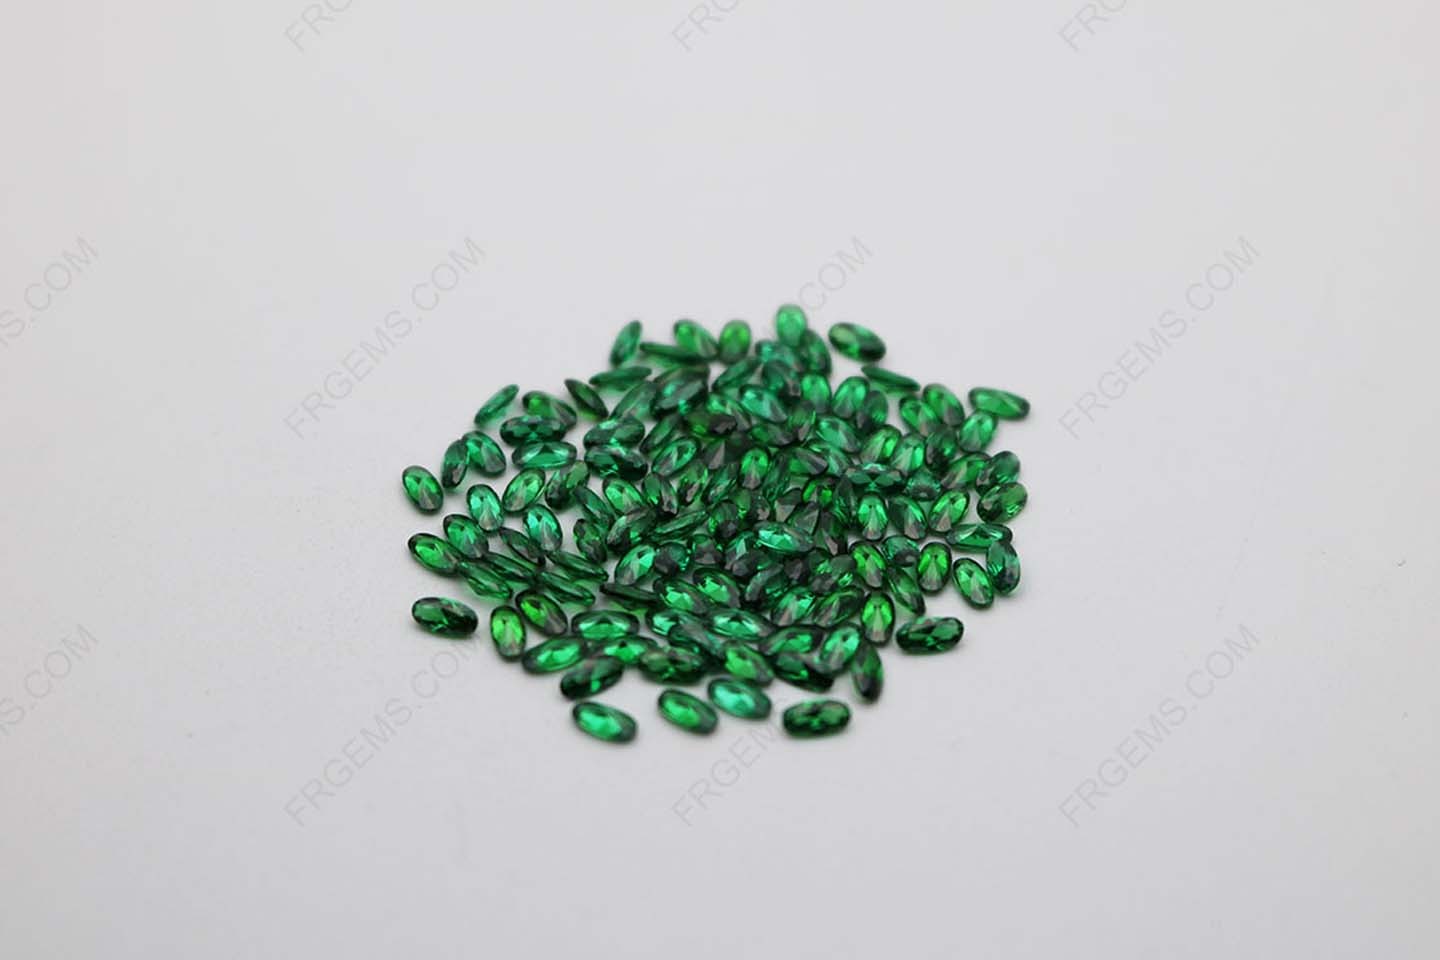 Cubic Zirconia Green Oval Shape Faceted Cut 4x2mm stones CZ35 IMG_1035